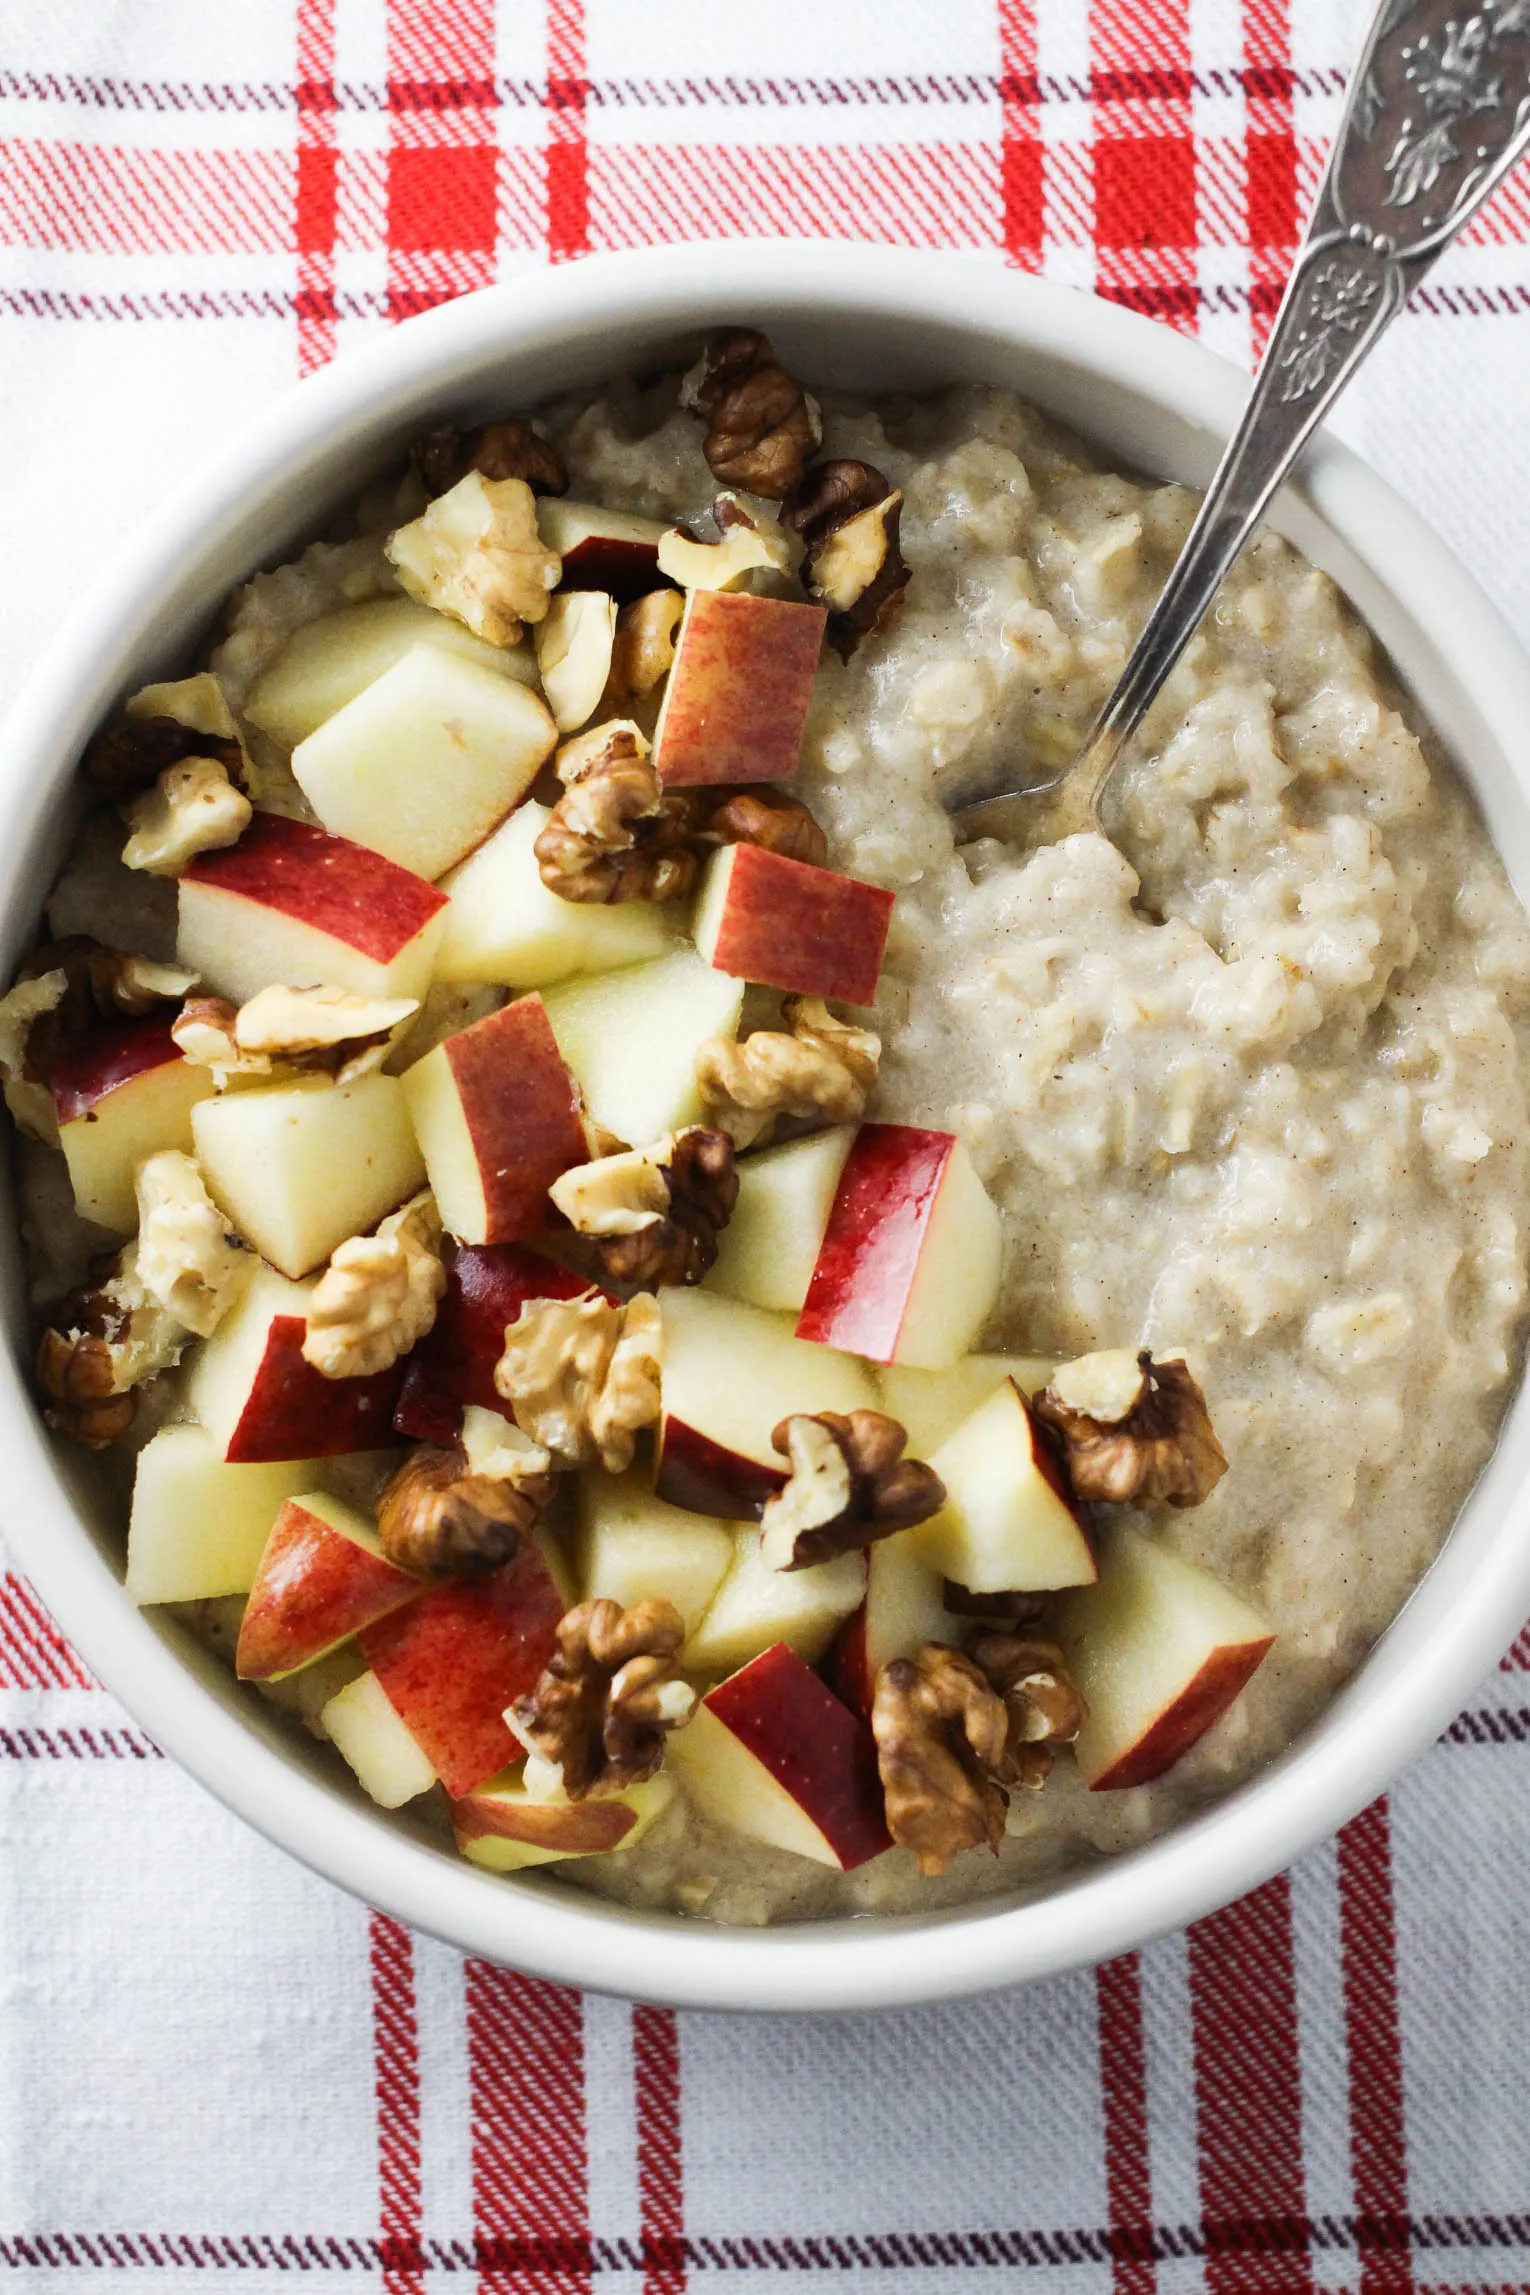 Overhead shot of oatmeal in a bowl garnished with apples and walnuts. There is a silver spoon in the oats.